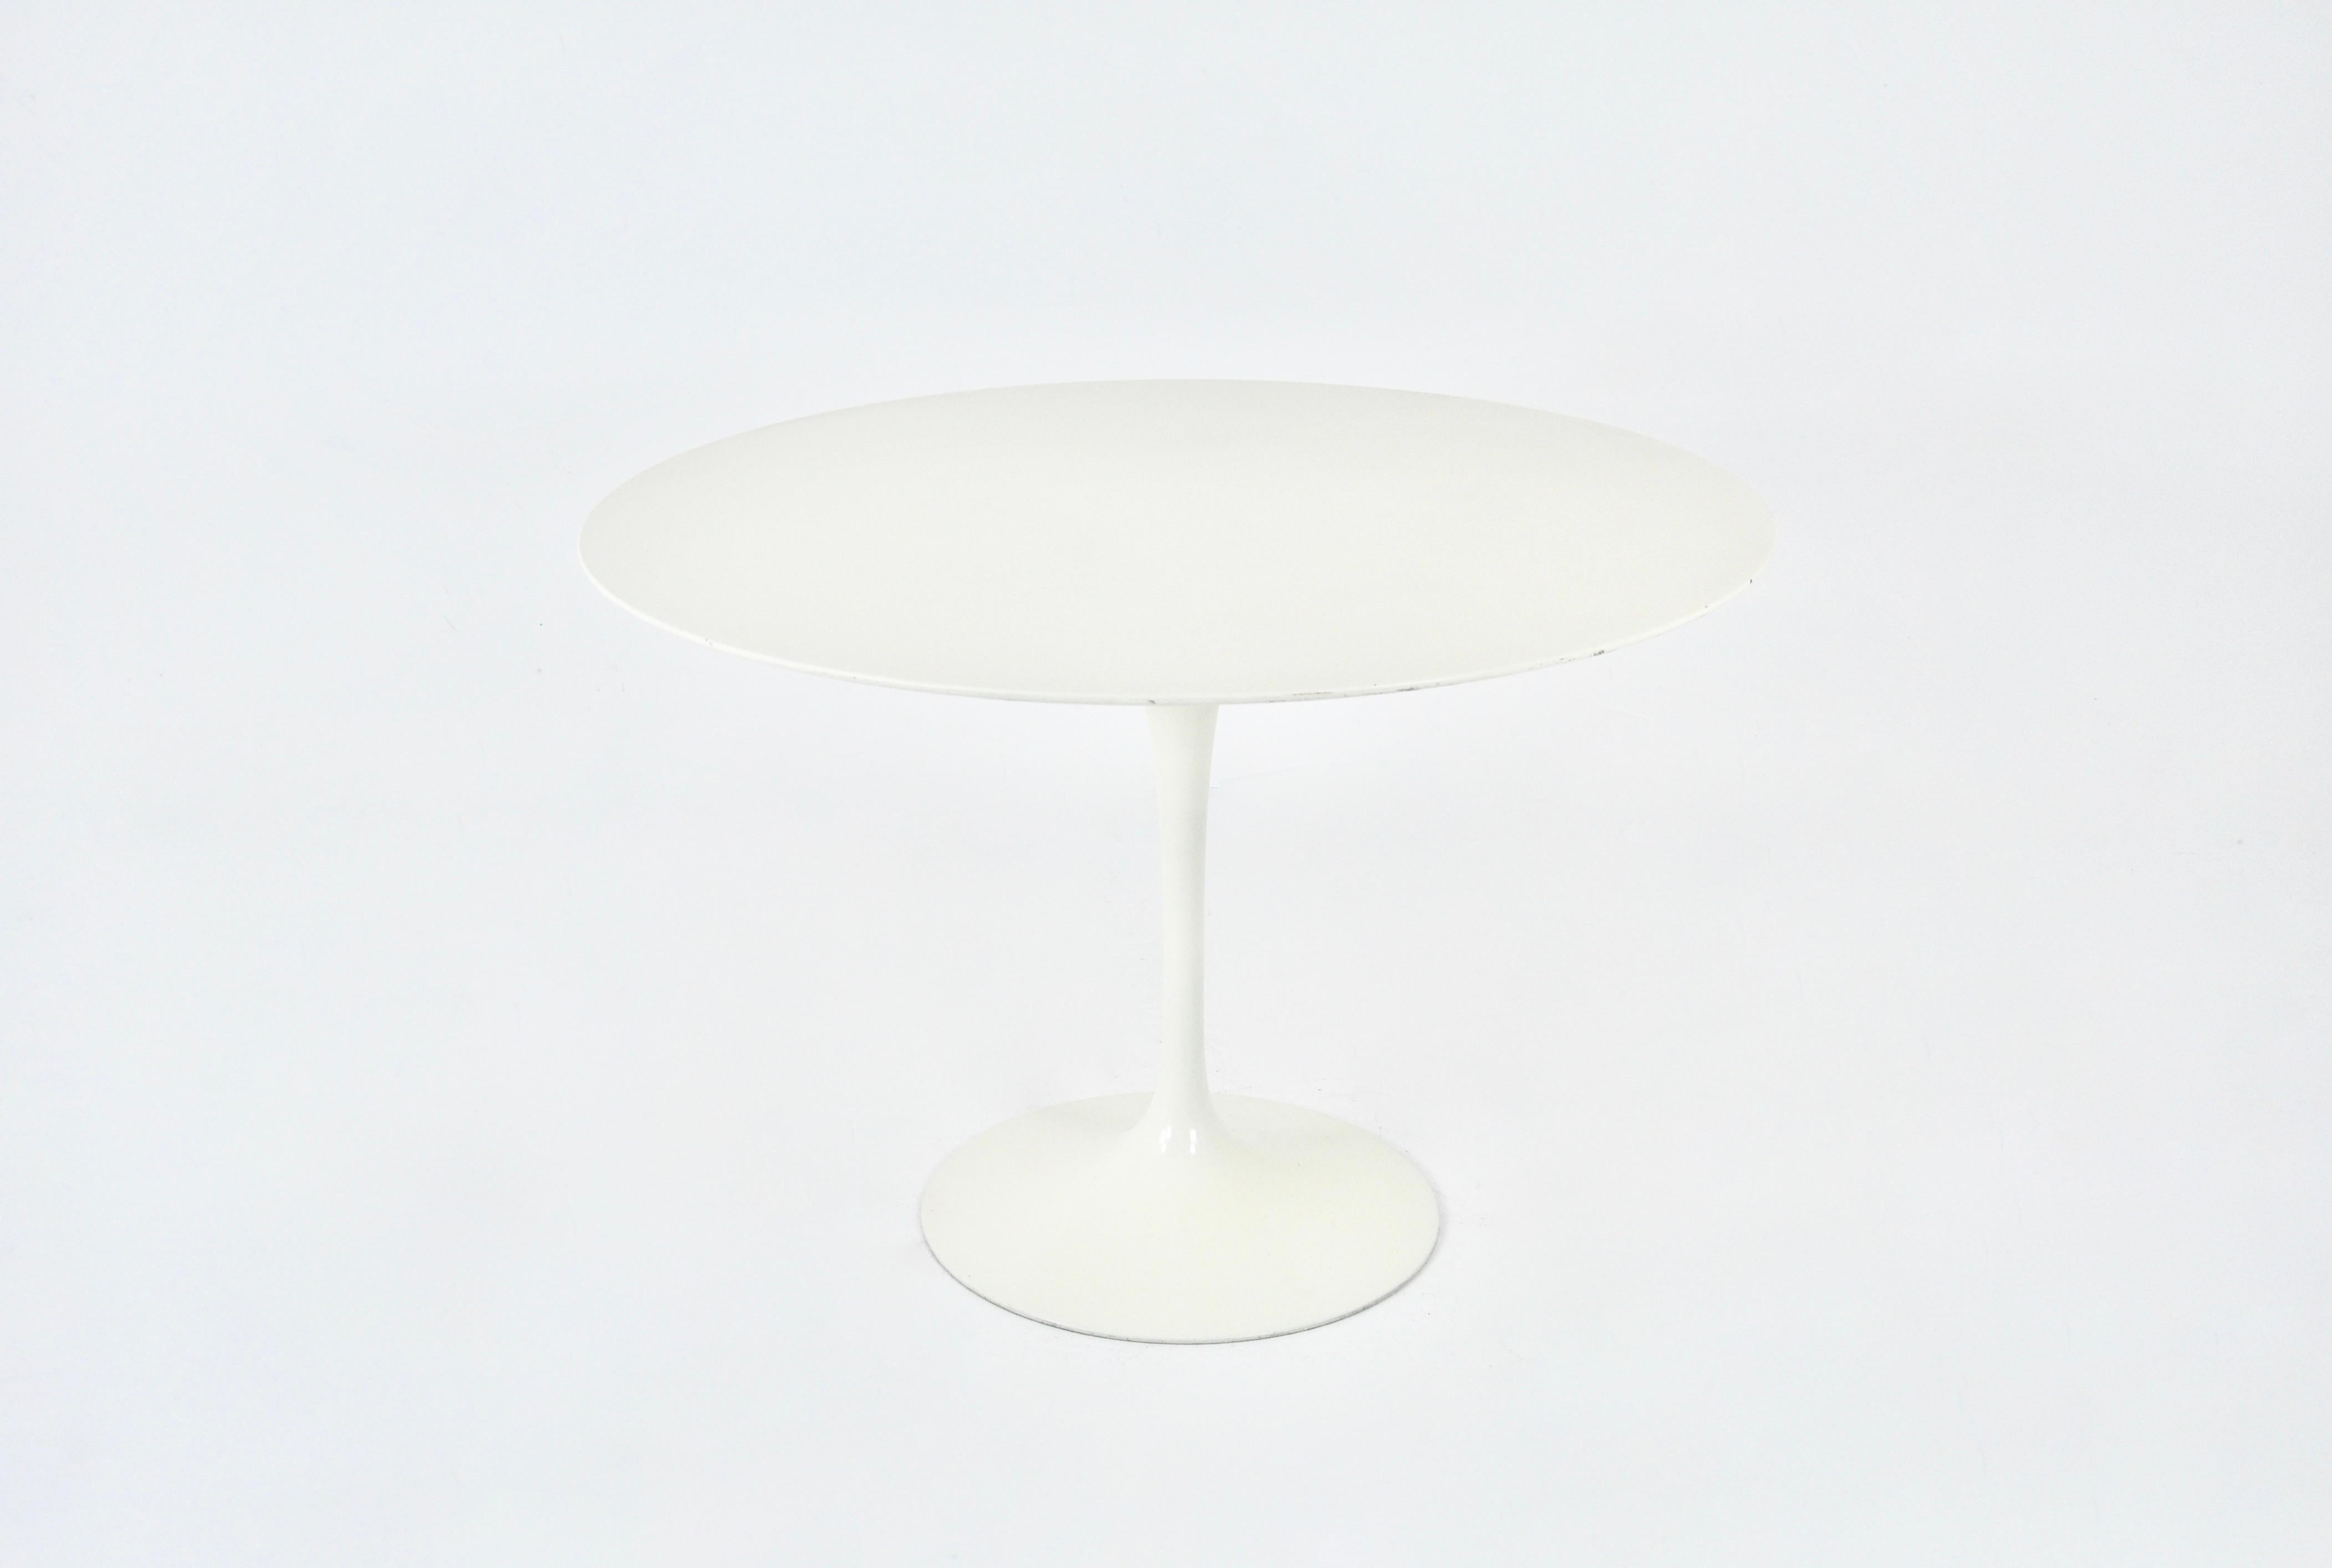 Round table in white laminate with aluminium base designed by Eero Saarinen and produced by Knoll International. stamped Knoll International. Wear due to time and age of the table.